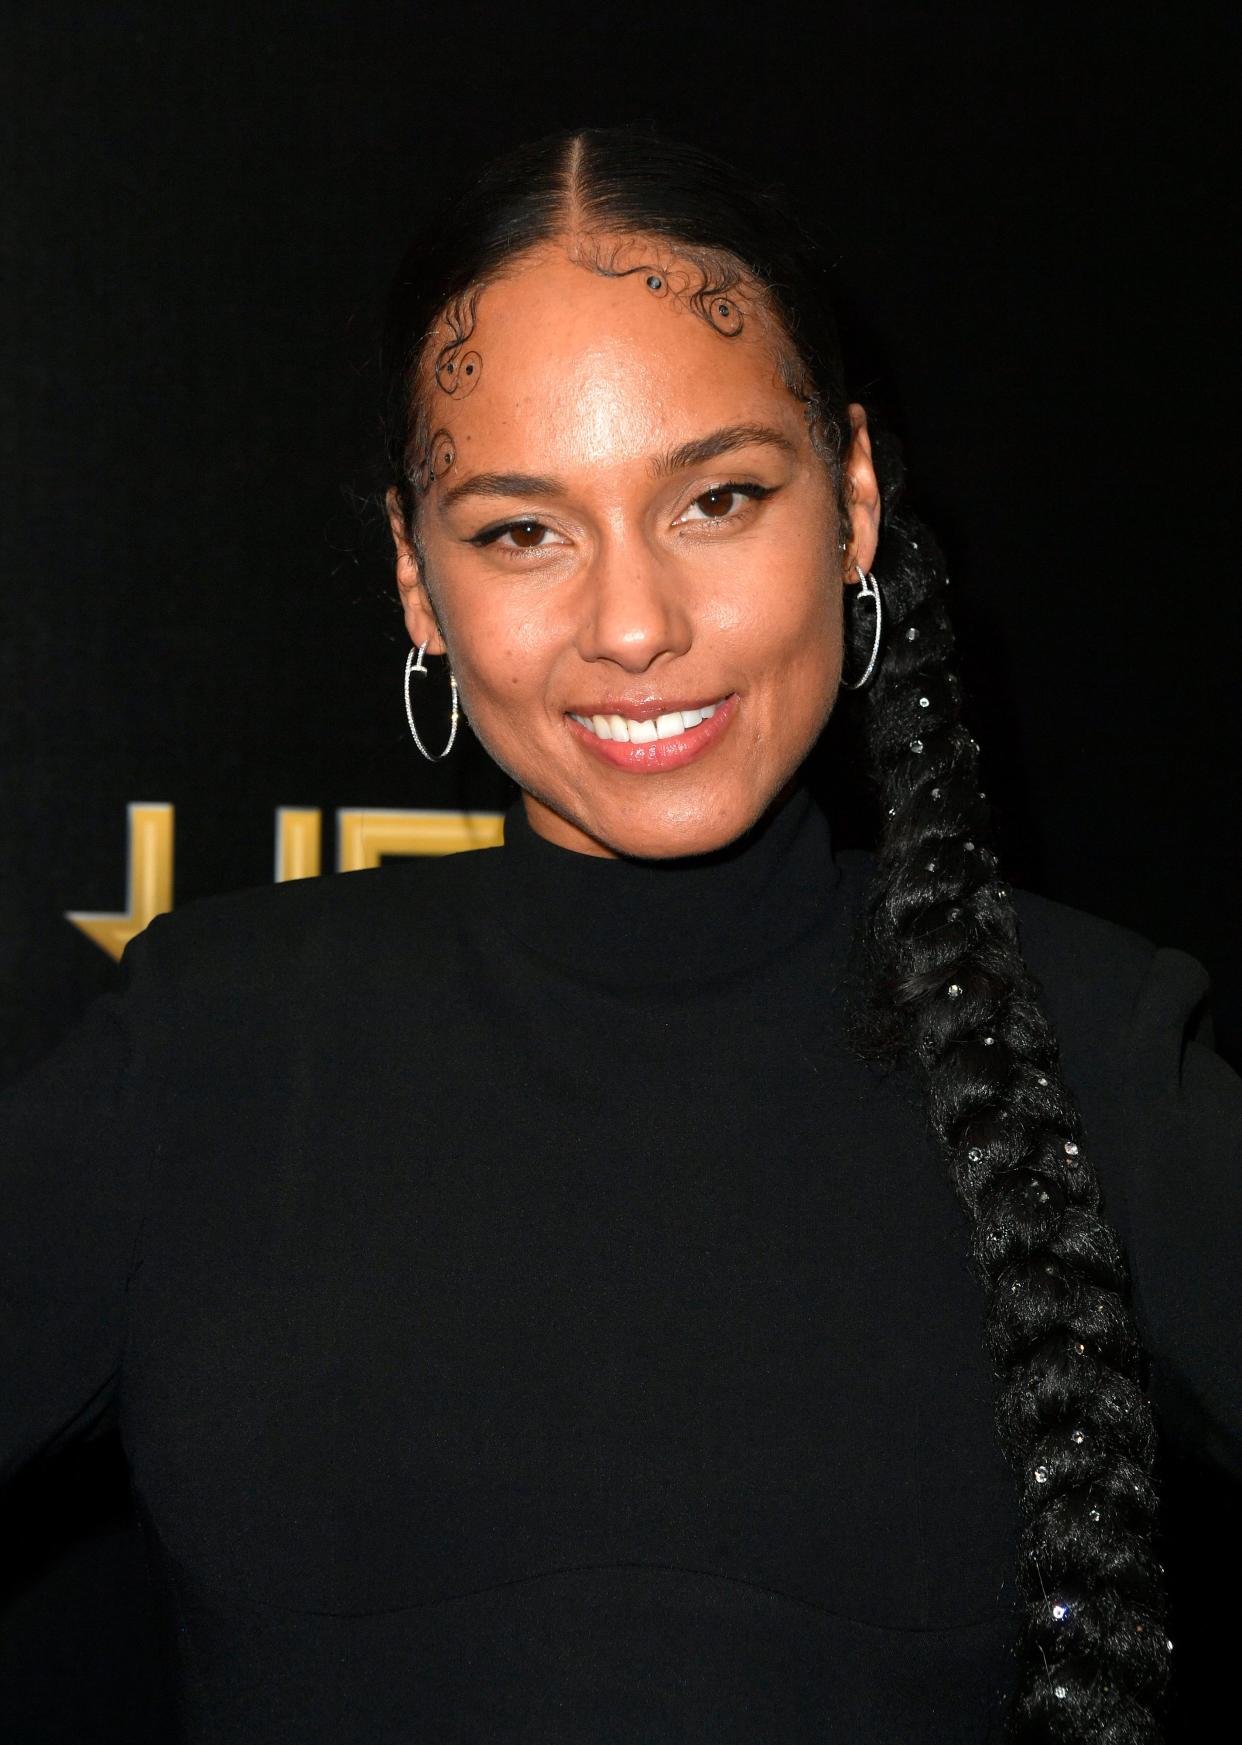 Alicia Keys looks gorgeous as always in a long-sleeve black dress, with braided ponytail.